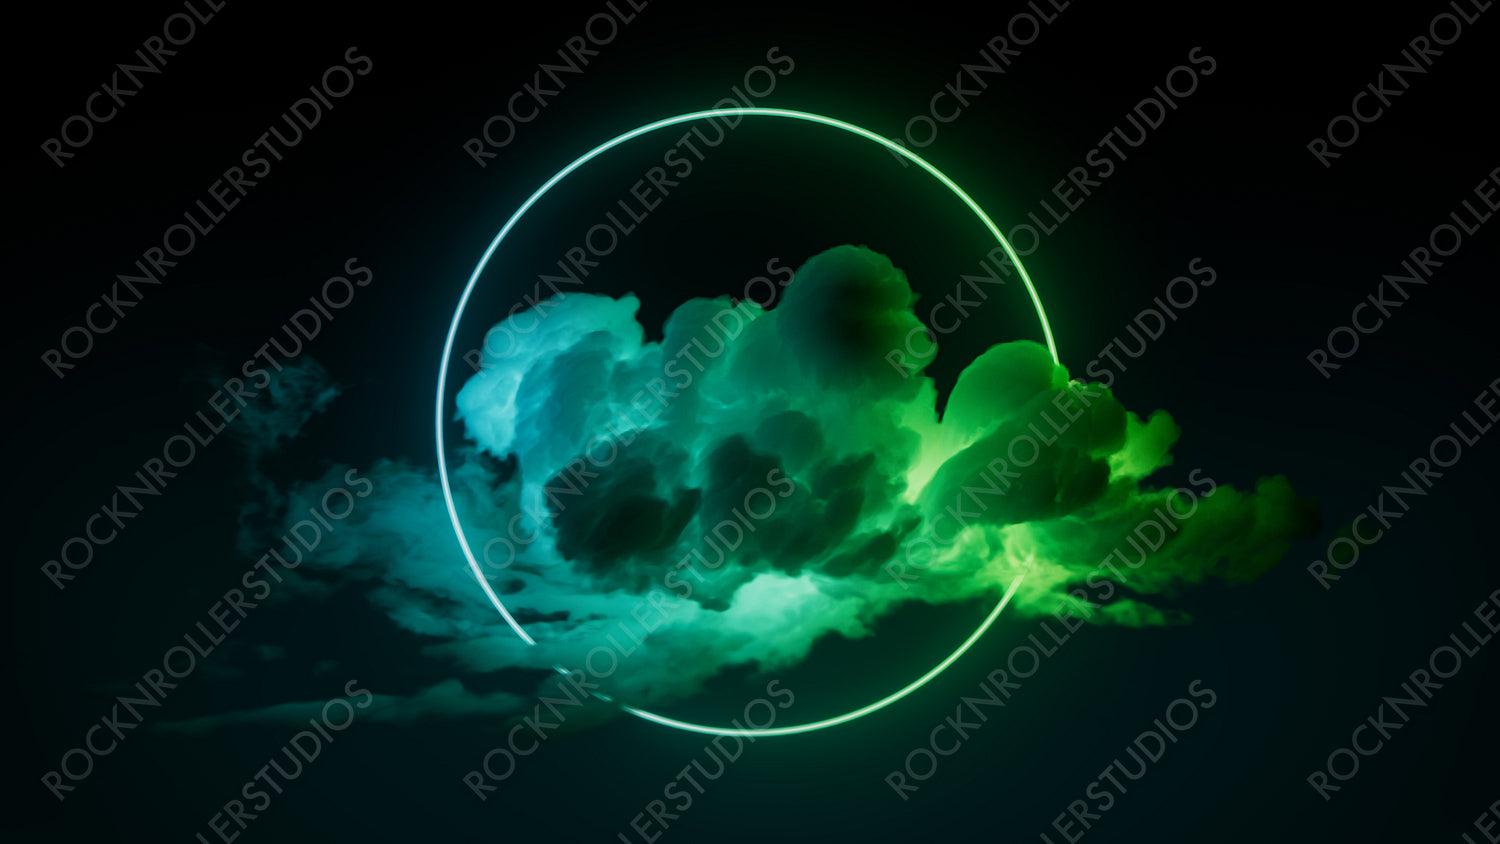 Cloud Formation Illuminated with Green and Turquoise Fluorescent Light. Dark Environment with Circle shaped Neon Frame.